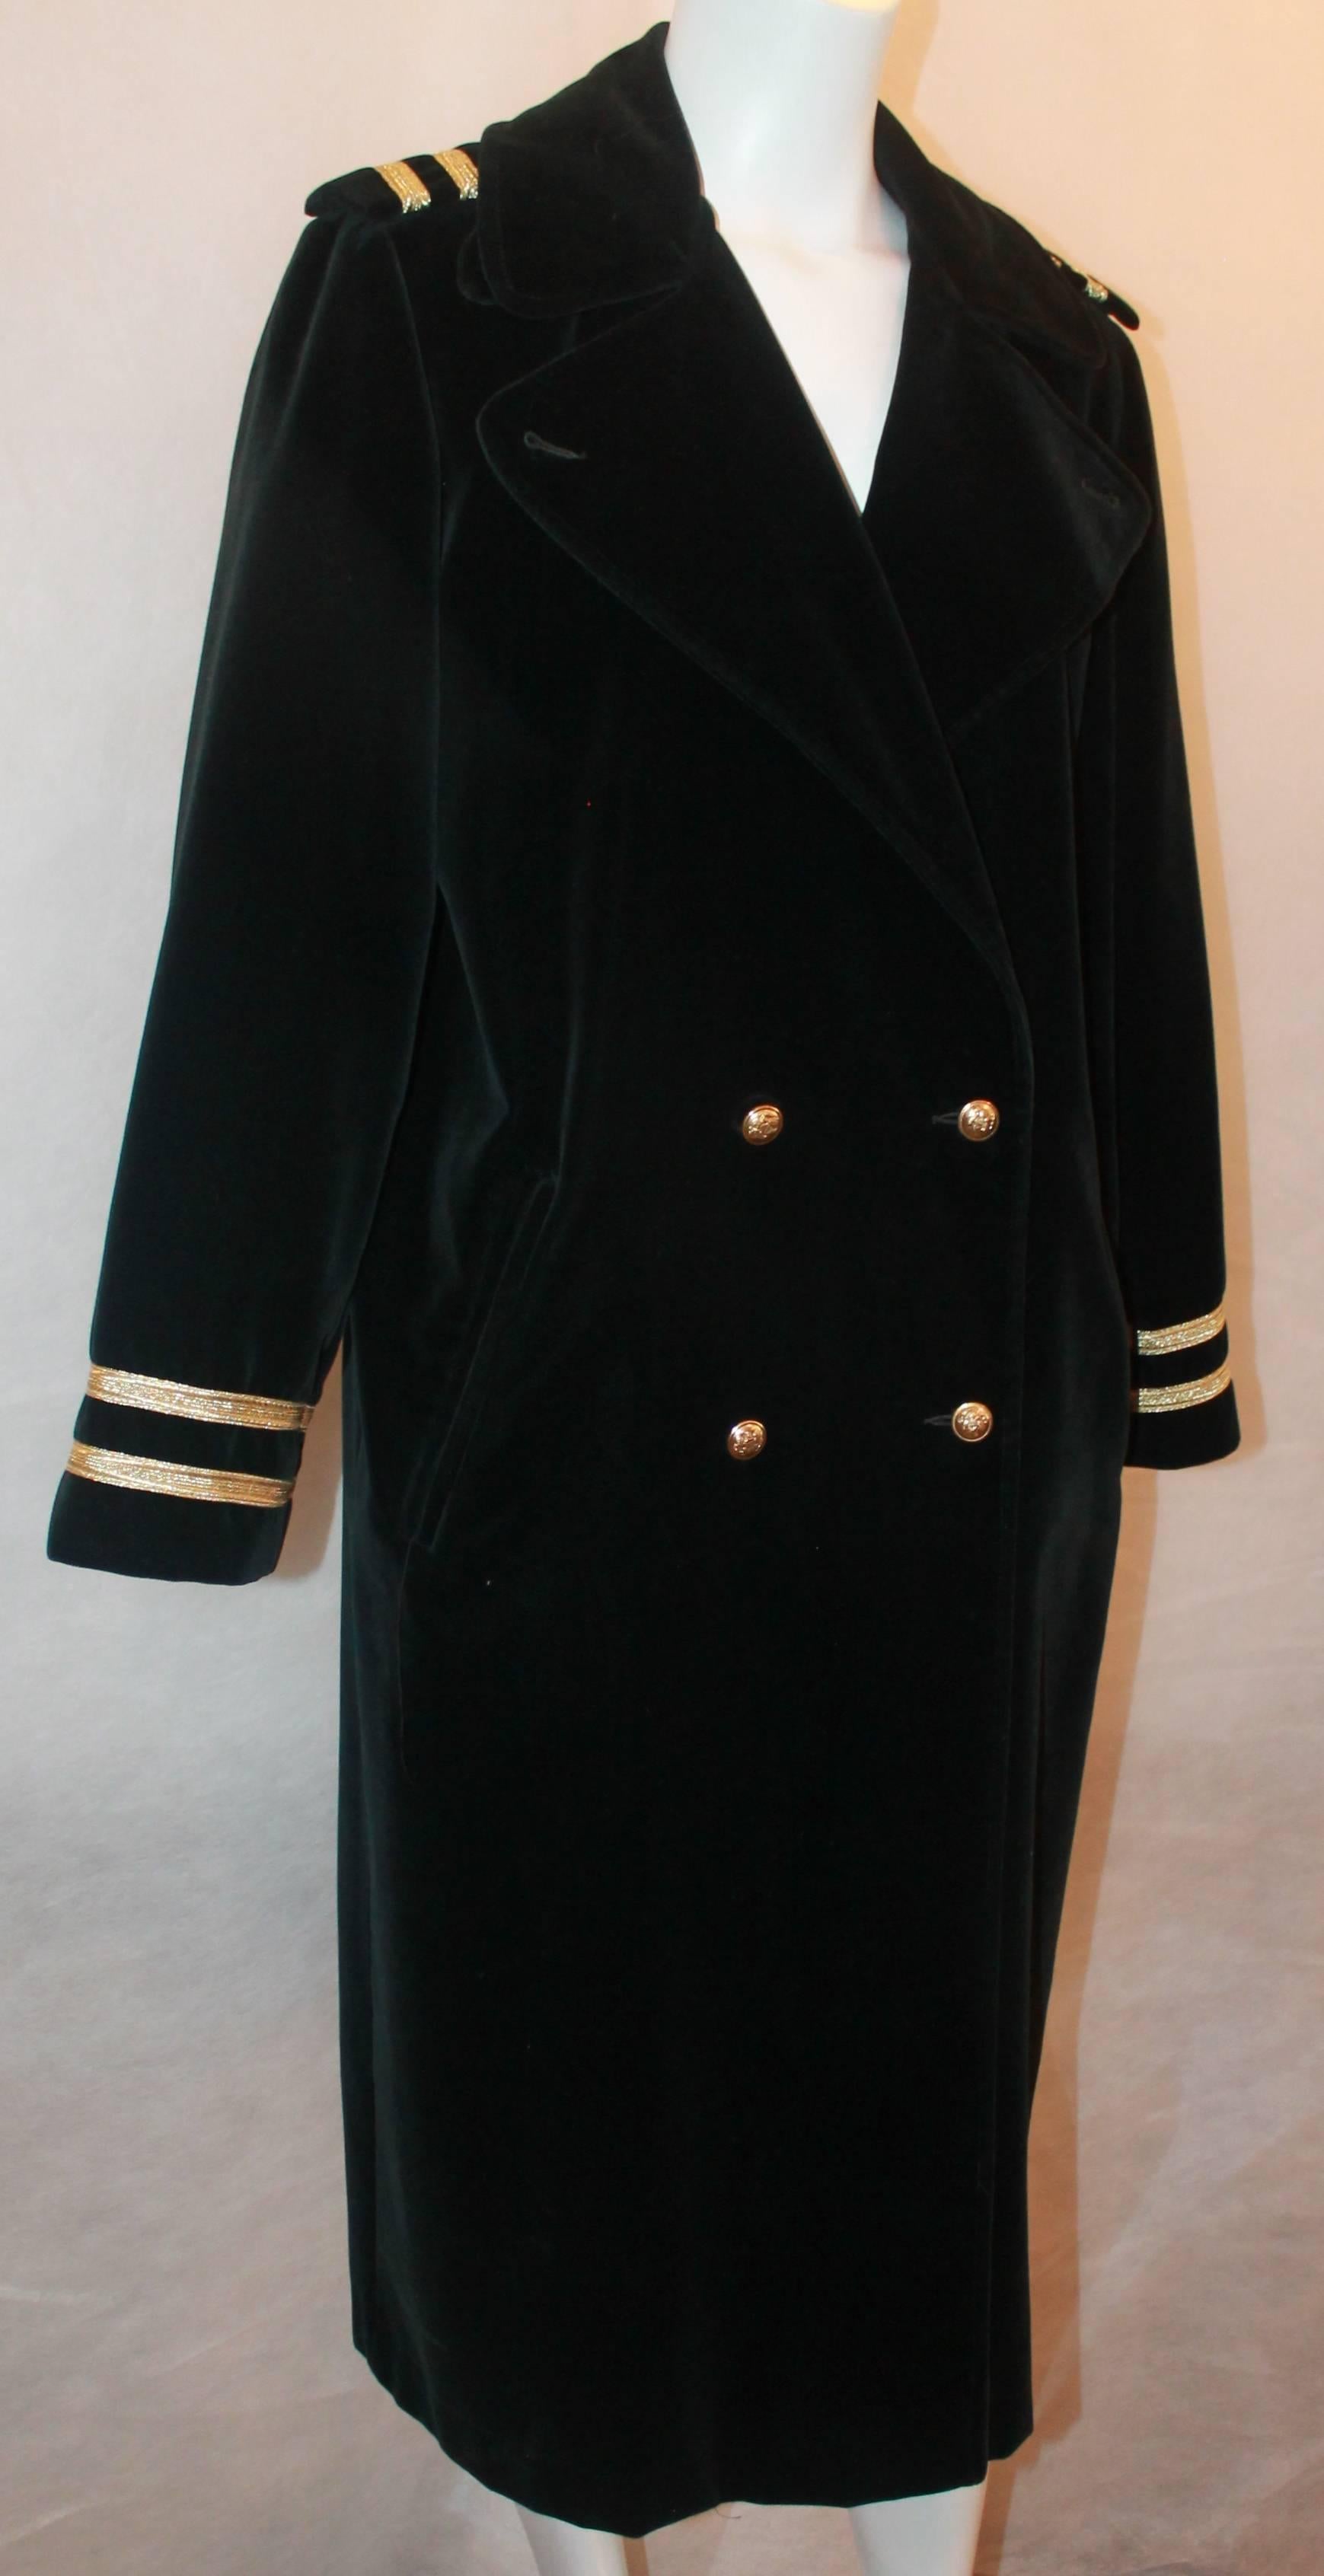 Carol Cohen Drizzle Vintage Black Velvet Nautical Style Rain Coat - M/L - 1990's. This coat is in very good condition with minor general wear all over due to its age. The velvet 